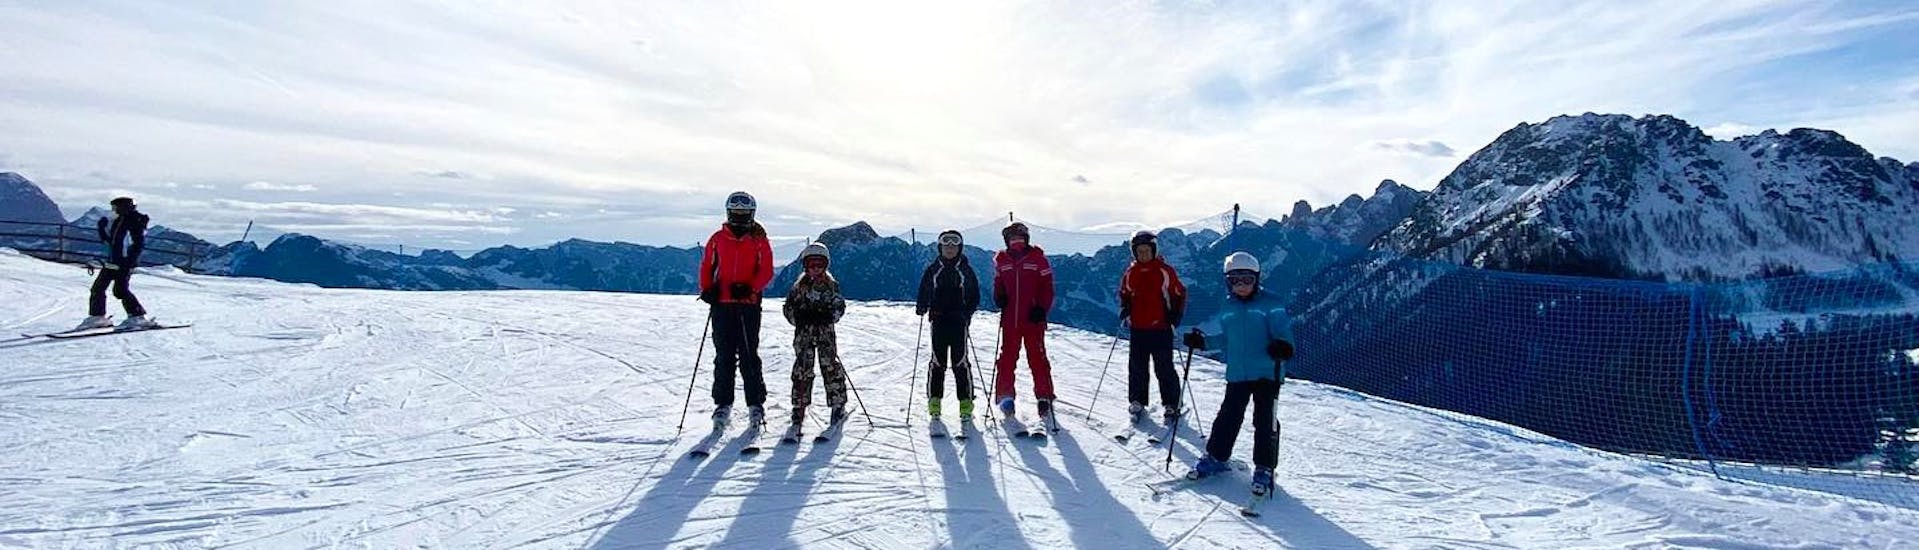 Kids Ski Lessons (4-15 y.) for All Levels - Carnival.